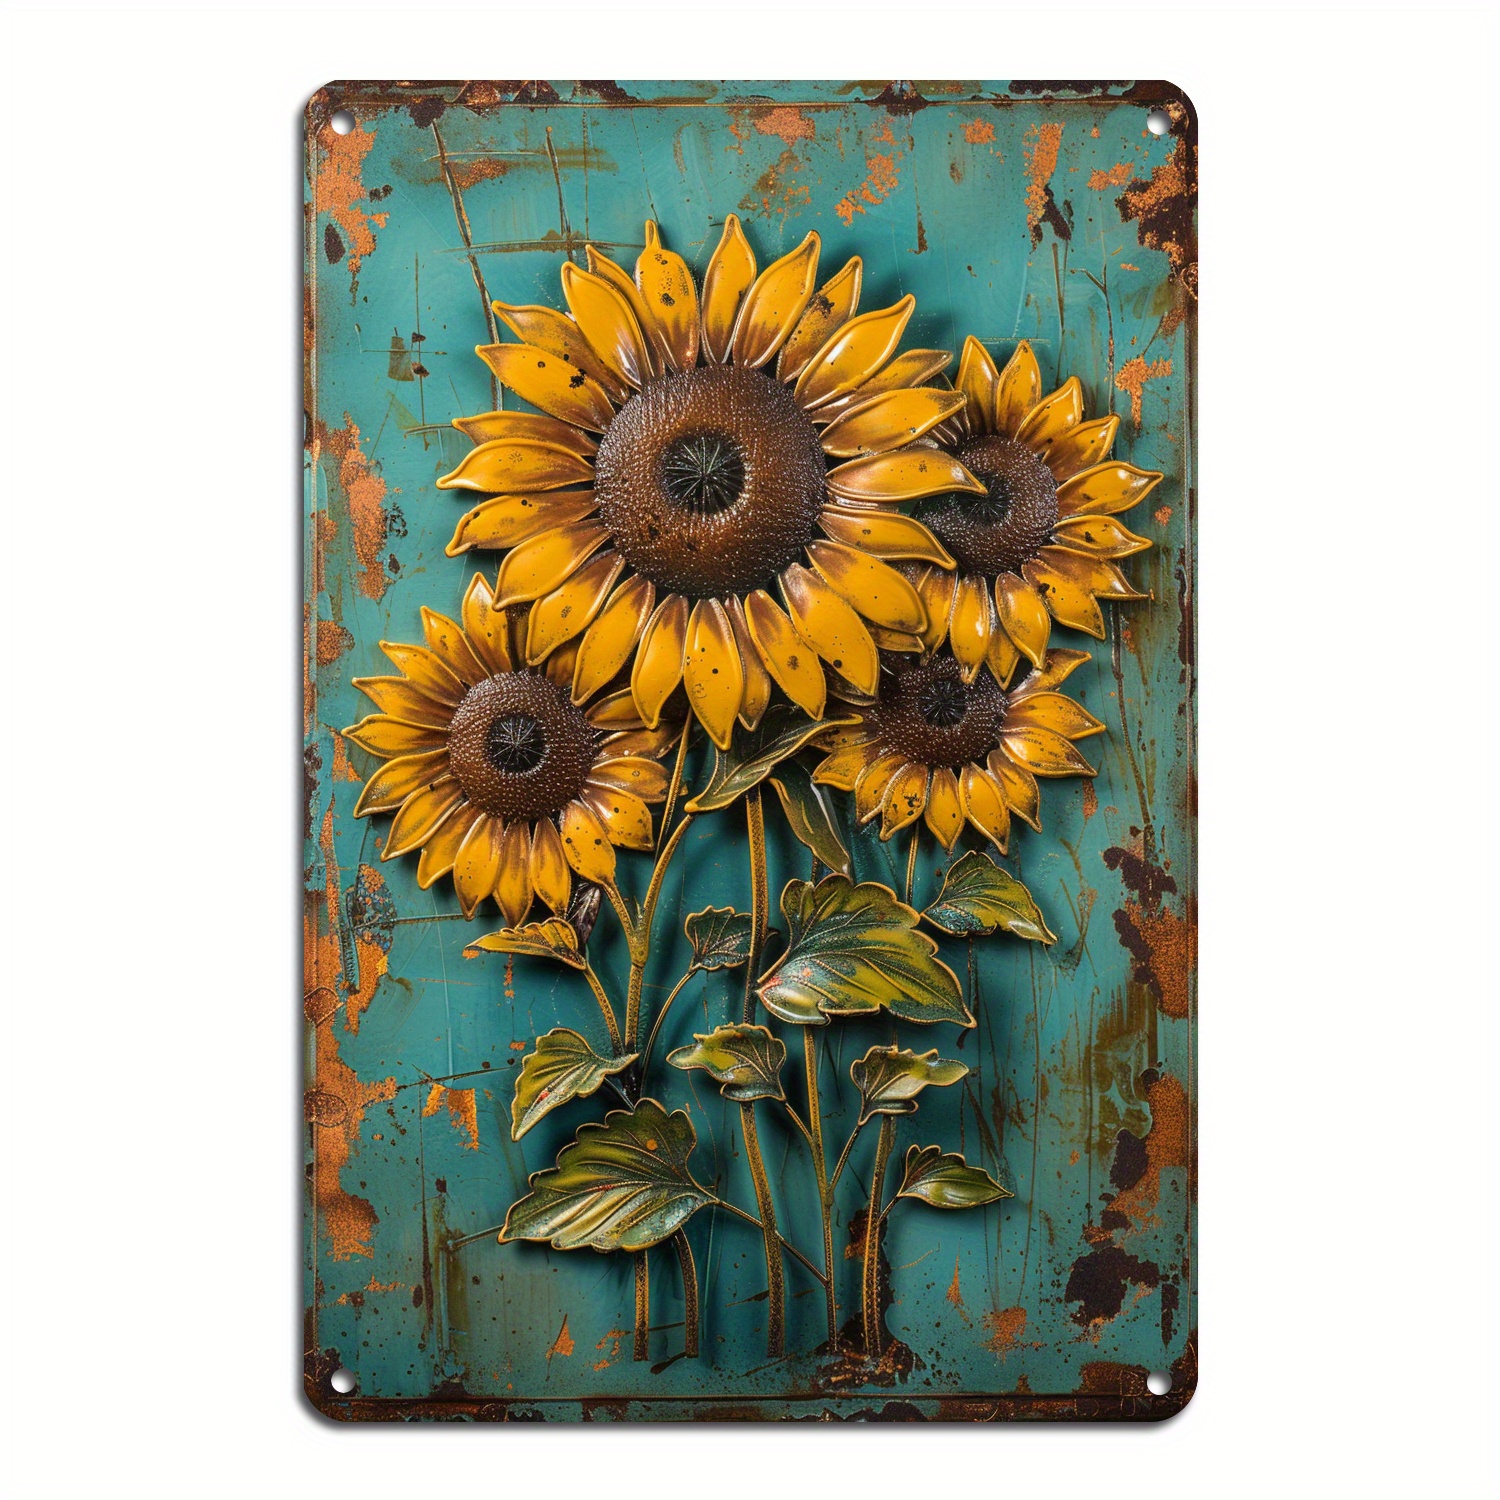 

1pc 8x12inch Cute Sunflower Metal Tin Sign, Vintage Poster Painiting, For Home Kitchen Dining Room Bedroom Garden Bathroom Garage Hotel Office Bakery Decor